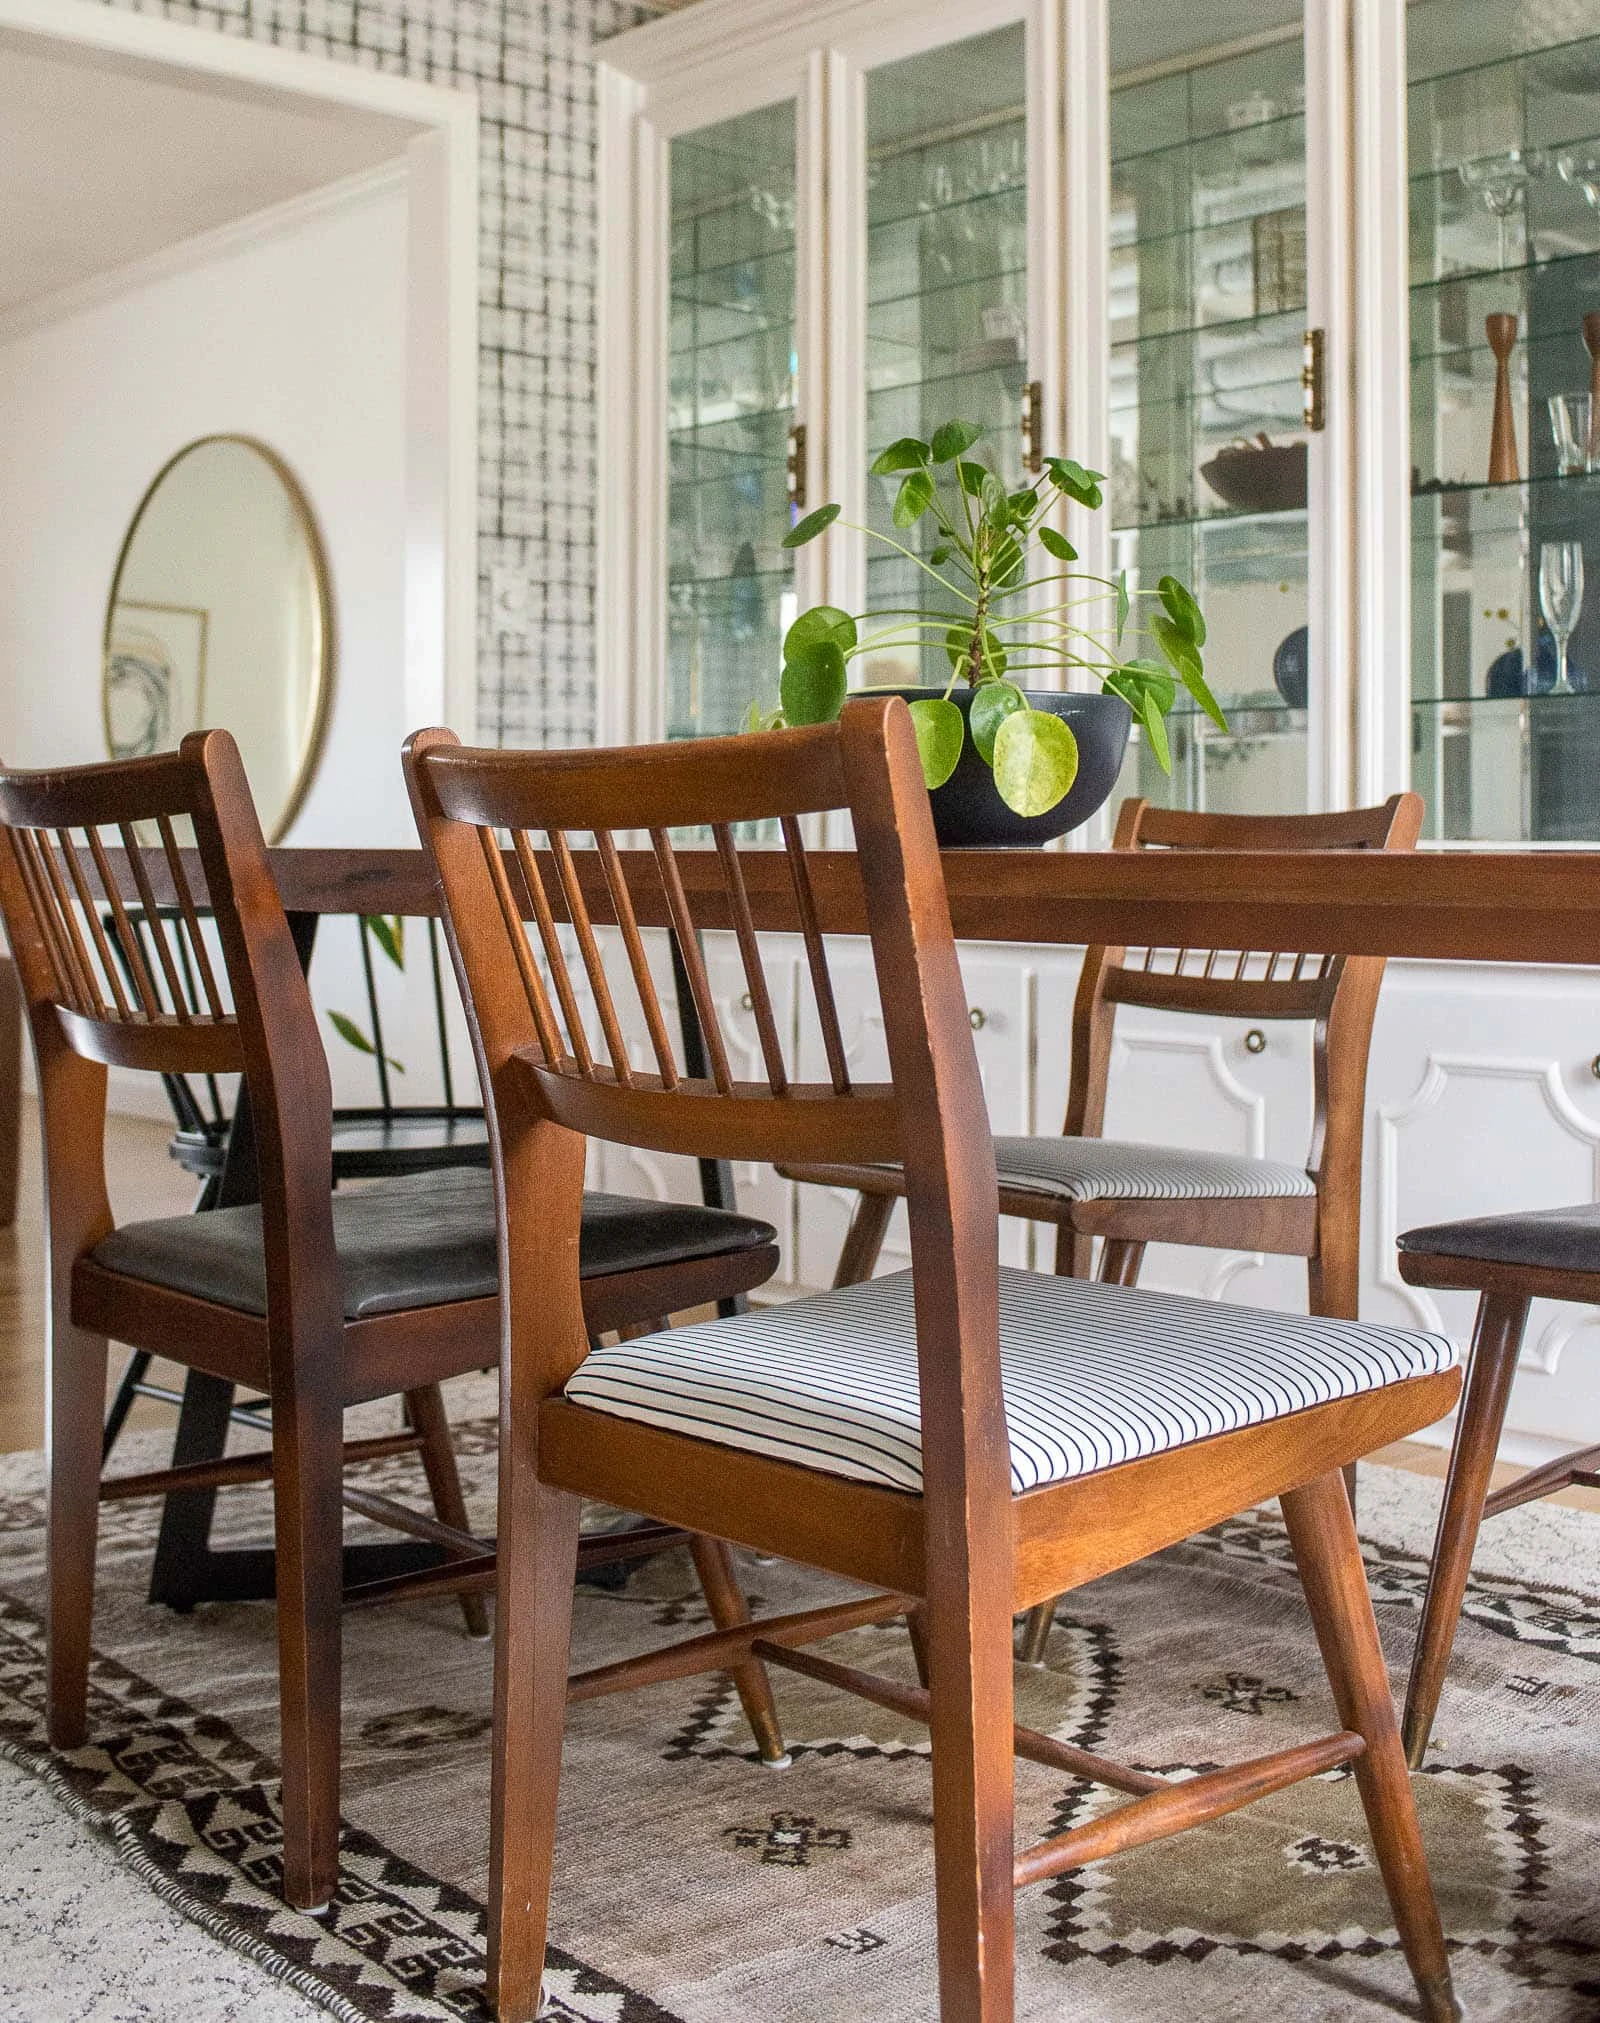 Midcentury dining room chairs around table